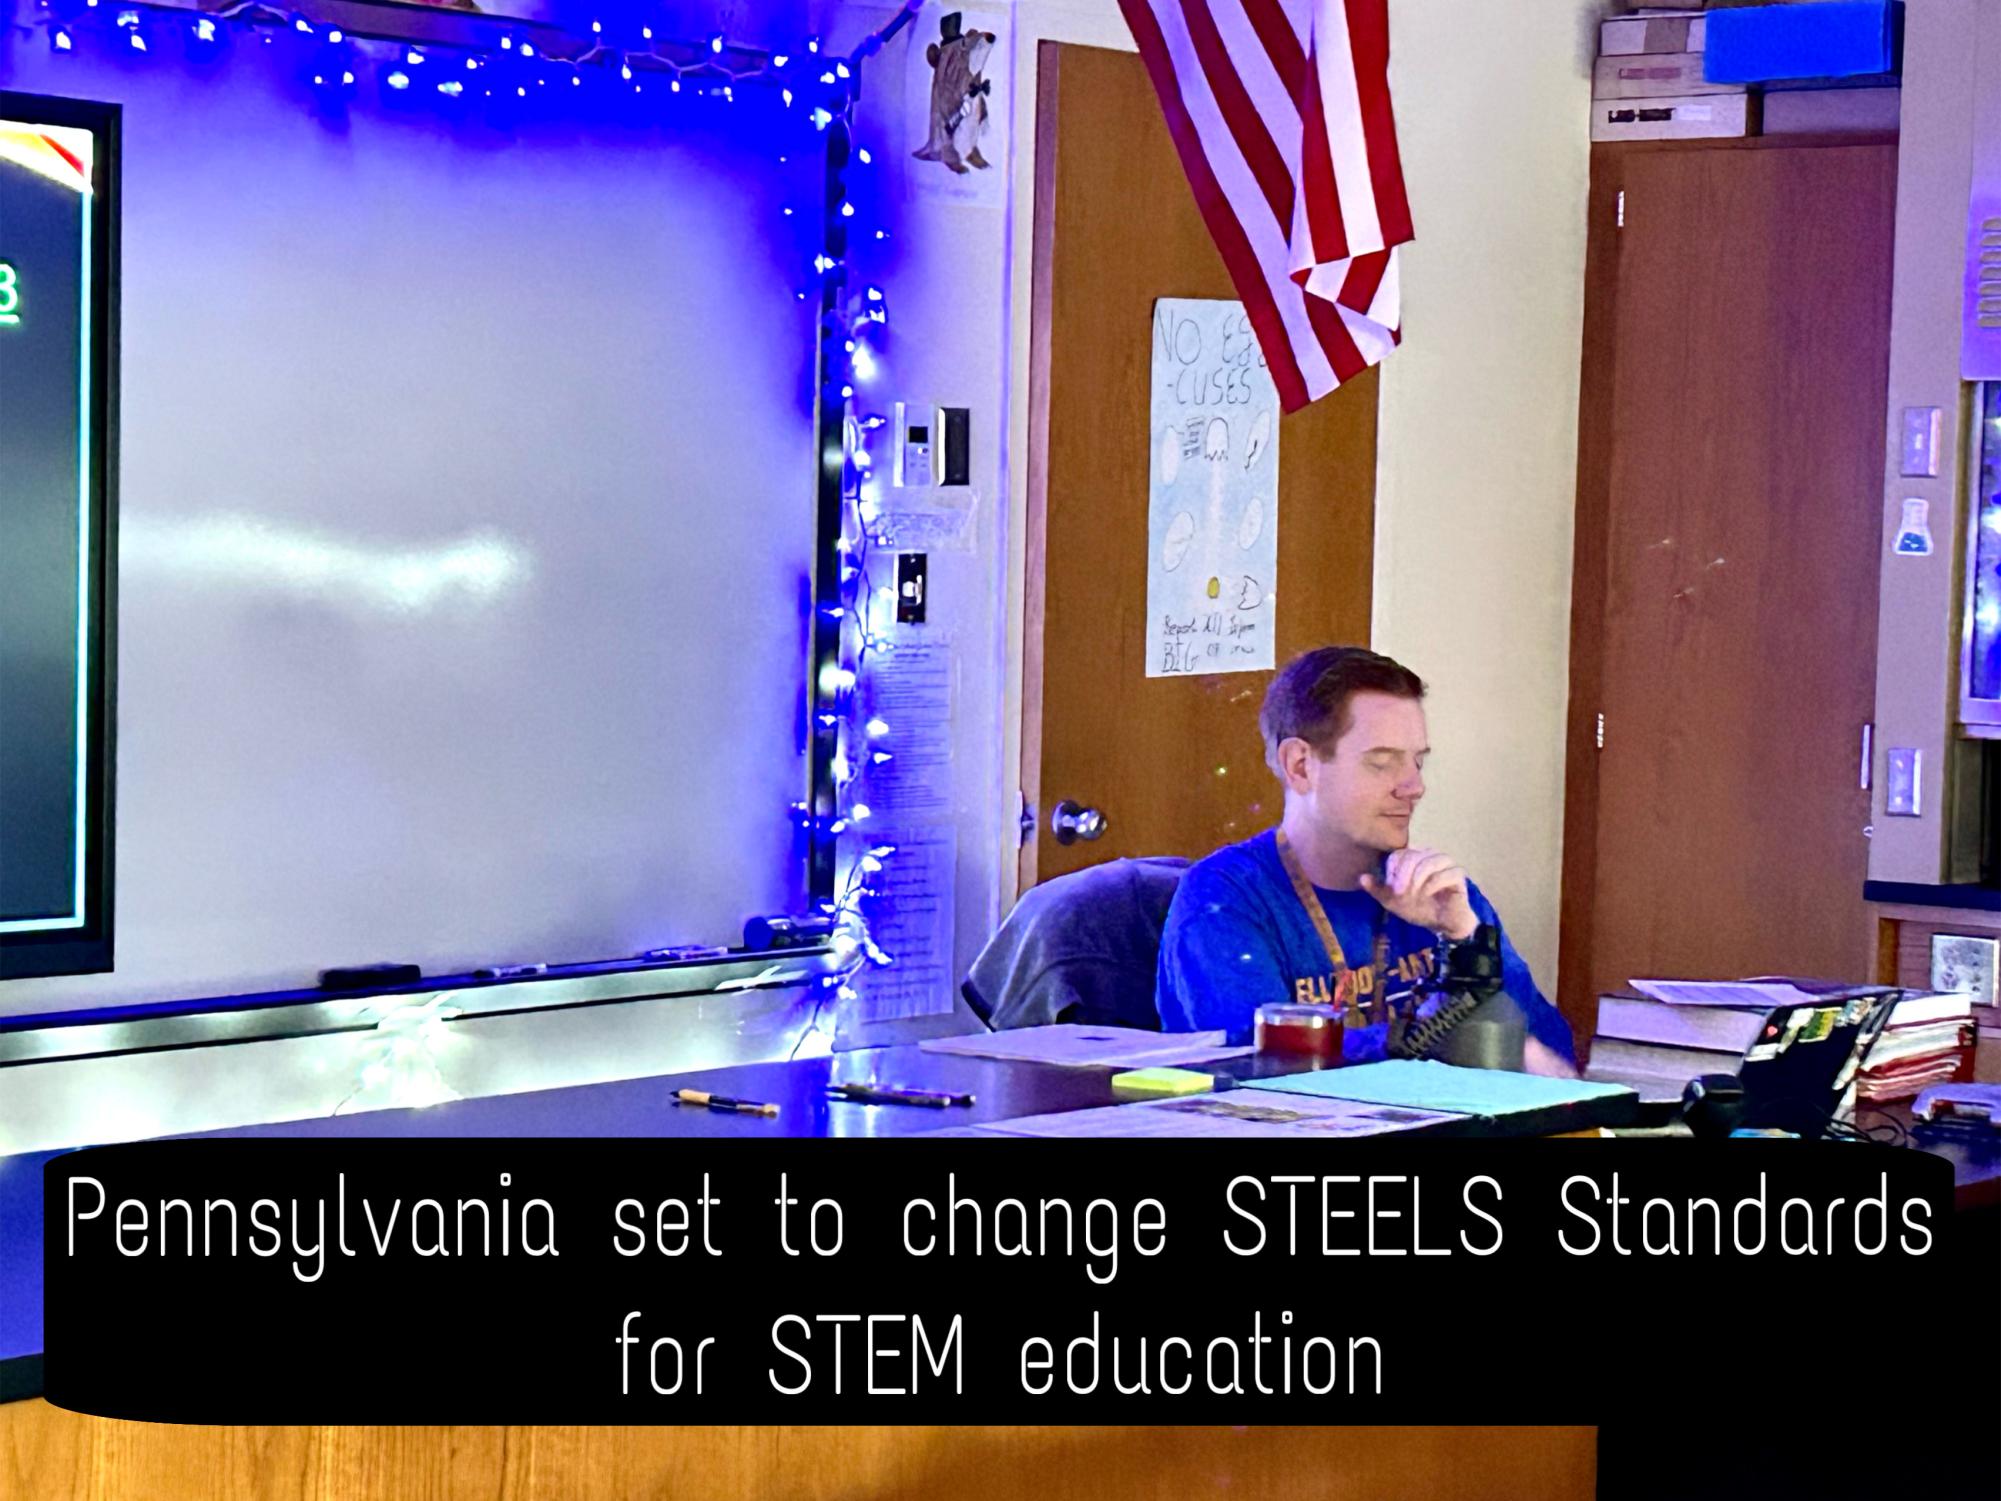 The STEM department at Bellwood-Antis is gearing up to take on the new STEELS Standards adopted by the board of education.